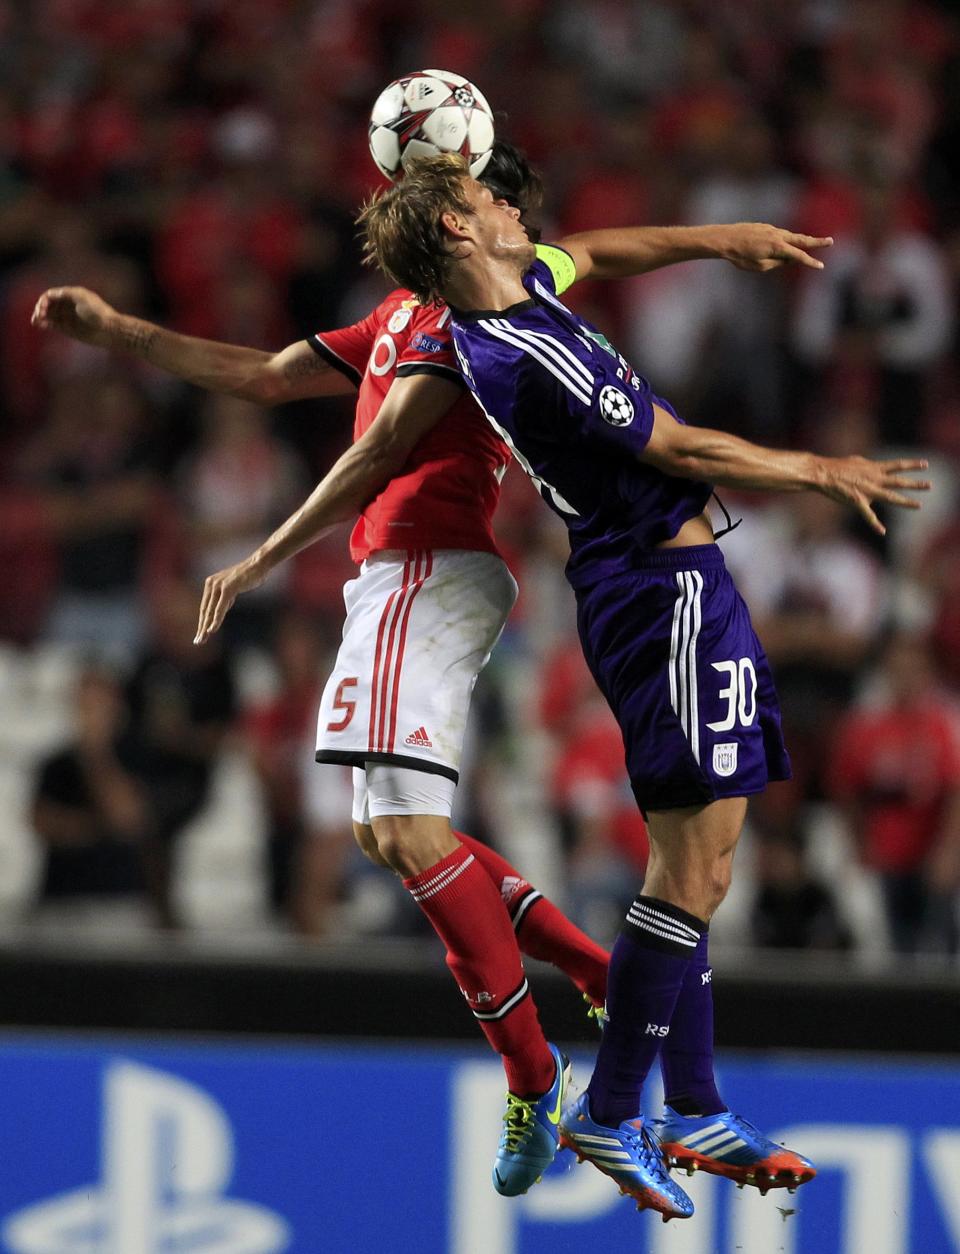 Benfica's Ljubomir Fejsa (L) and Anderlecht's Guillaume Gillet (R) fight for a high ball during their Champions League soccer match at the Luz Stadium in Lisbon September 17, 2013. REUTERS/Jose Manuel Ribeiro (PORTUGAL - Tags: SPORT SOCCER)